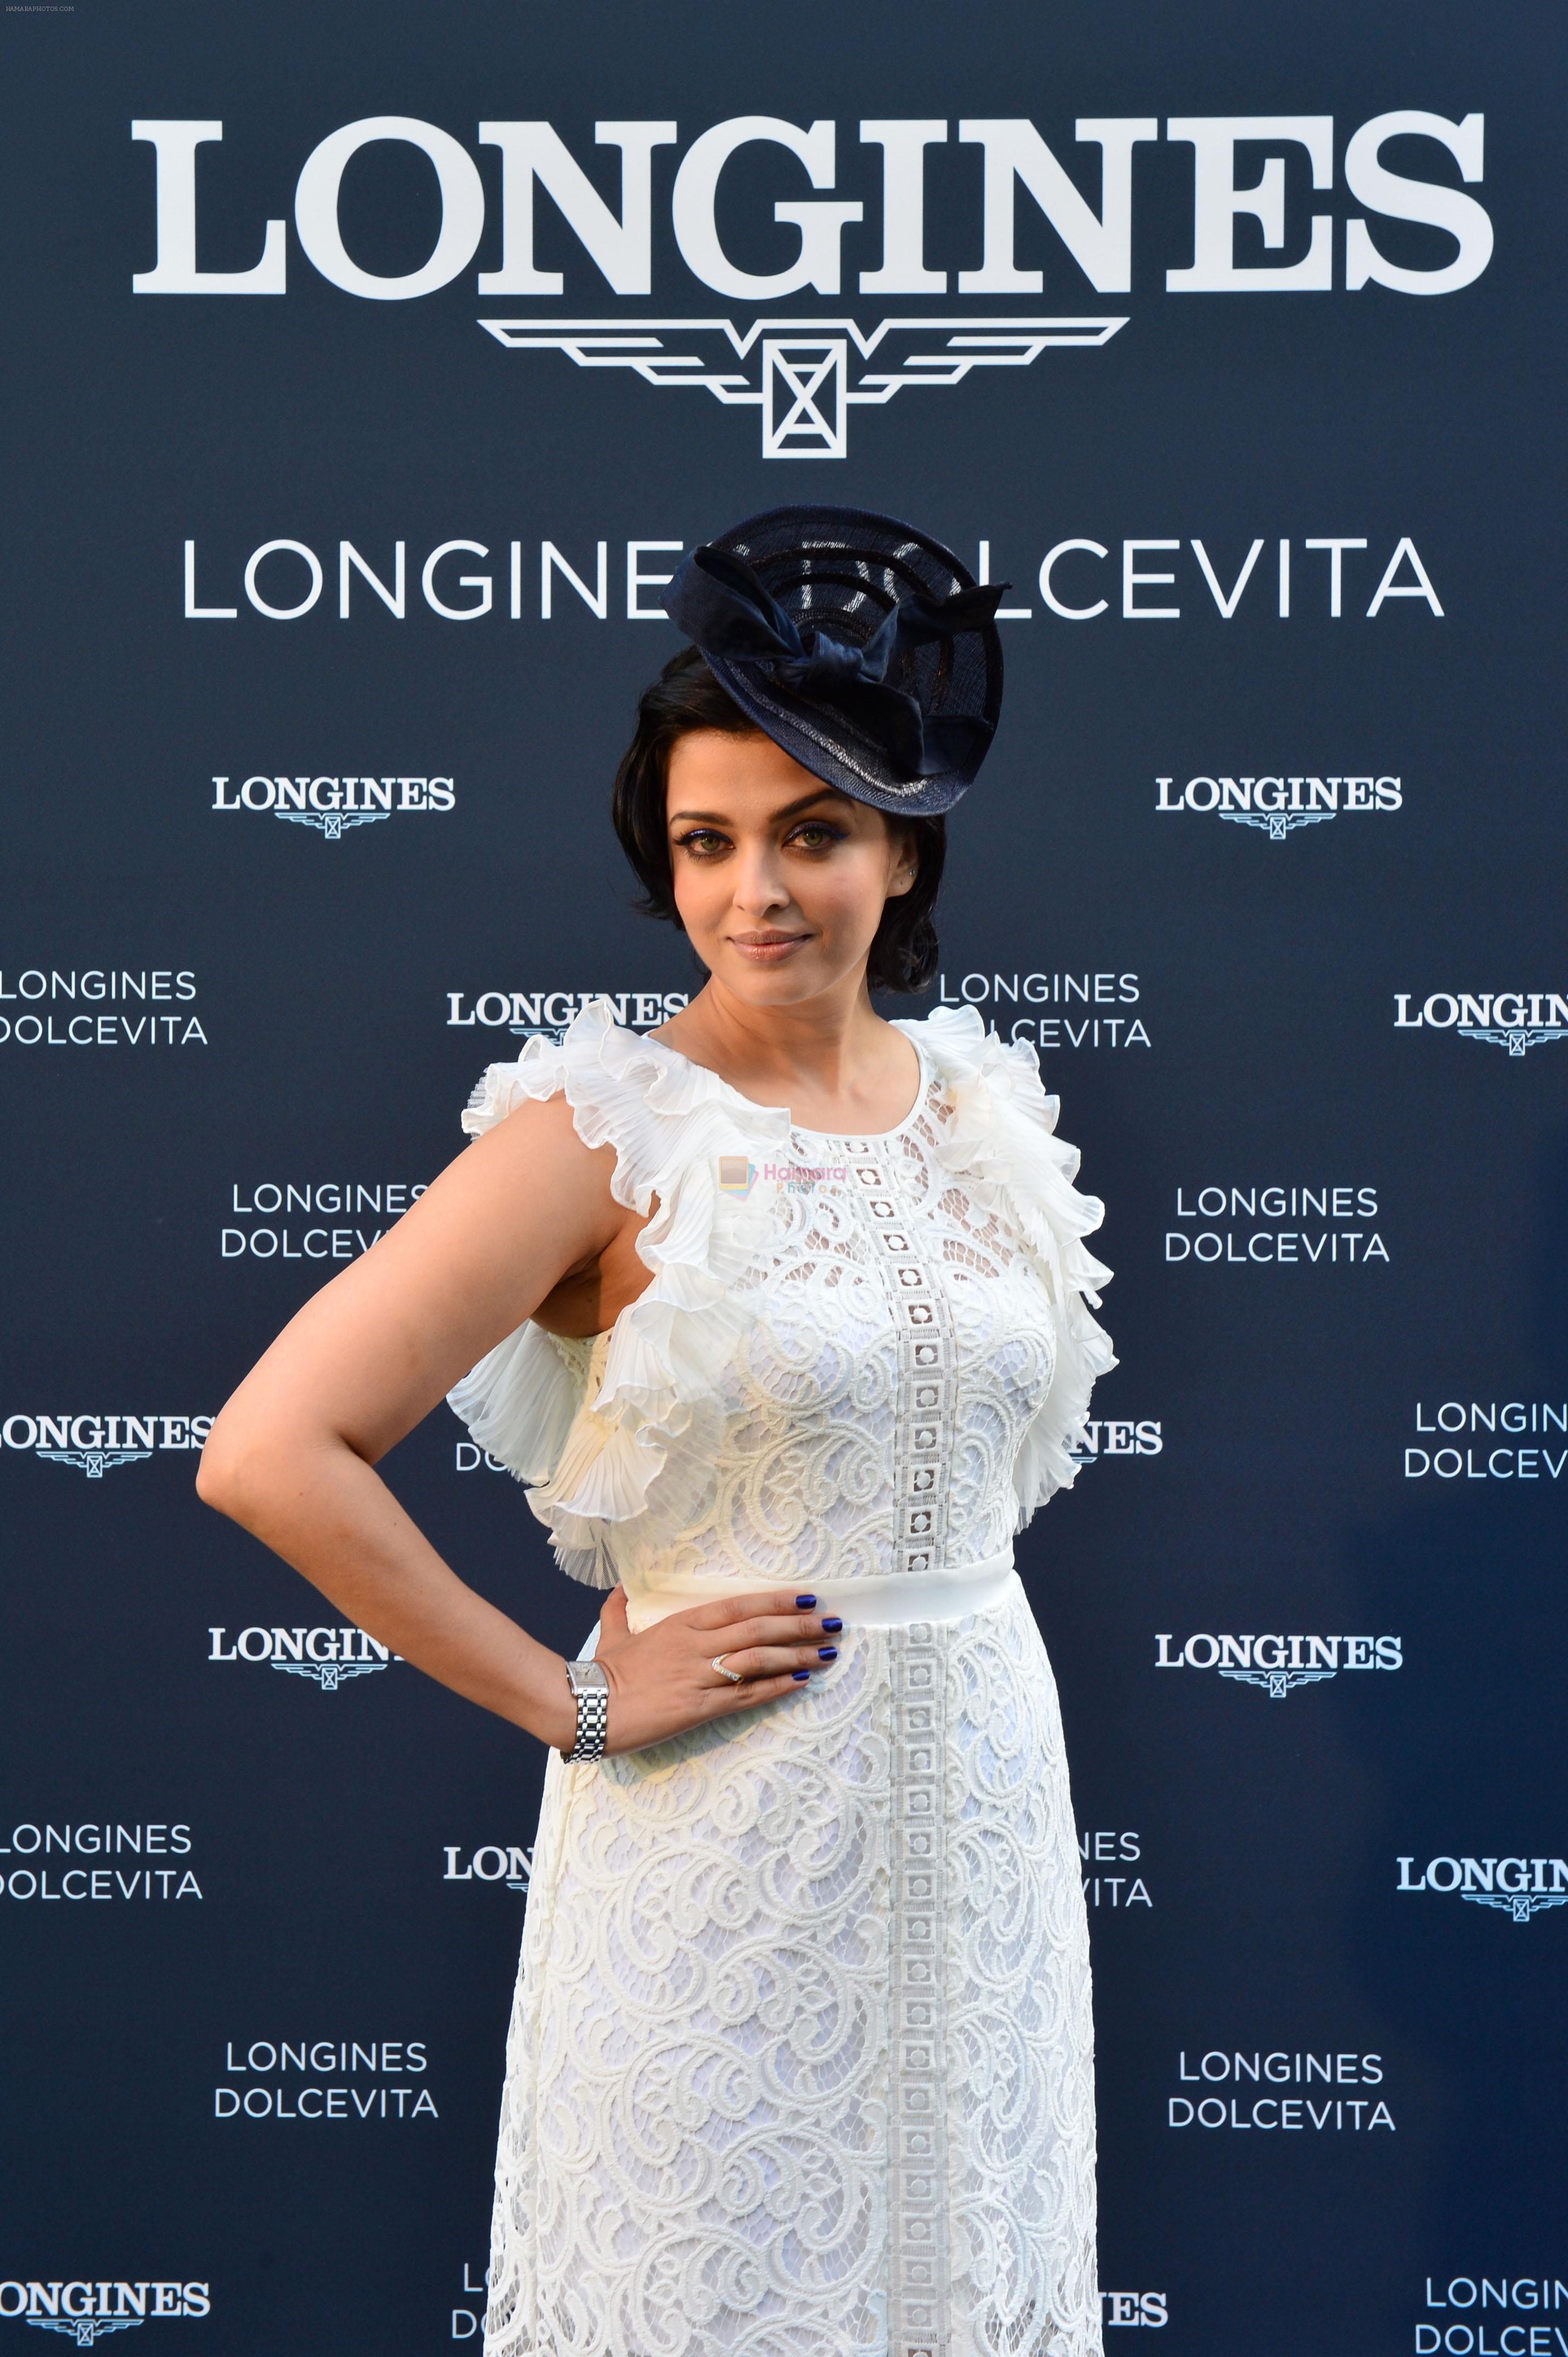 Aishwarya Rai Bachchan for Longiness at Chantilly Castle in Paris on 11th June 2015